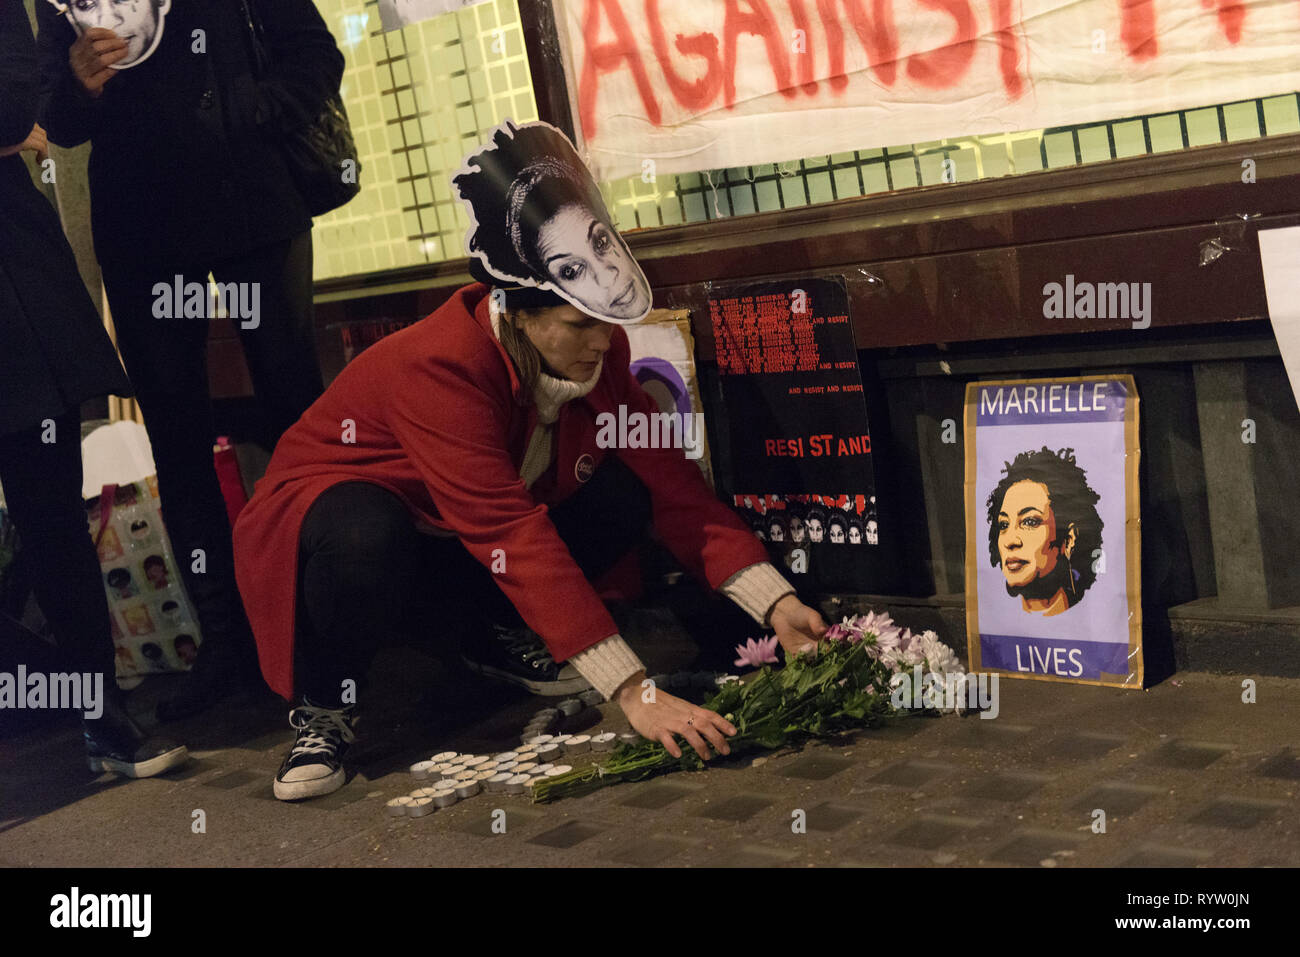 A woman seen putting flowers next to a poster with Marielle Franco image. Protesters gathered outside the Brazilian embassy in London to honor the life and legacy of Brazilian activist Marielle Franco who was an outspoken critic of police brutality and extrajudicial killings against favela residents. Franco was assassinated for her political activities along with her driver Anderson Gomes on March 14, 2018 in Rio de Janeiro, Brazil. During the vigil speakers addressed the assistants and claimed justice and demanded the end of the impunity in Franco's crime. Stock Photo